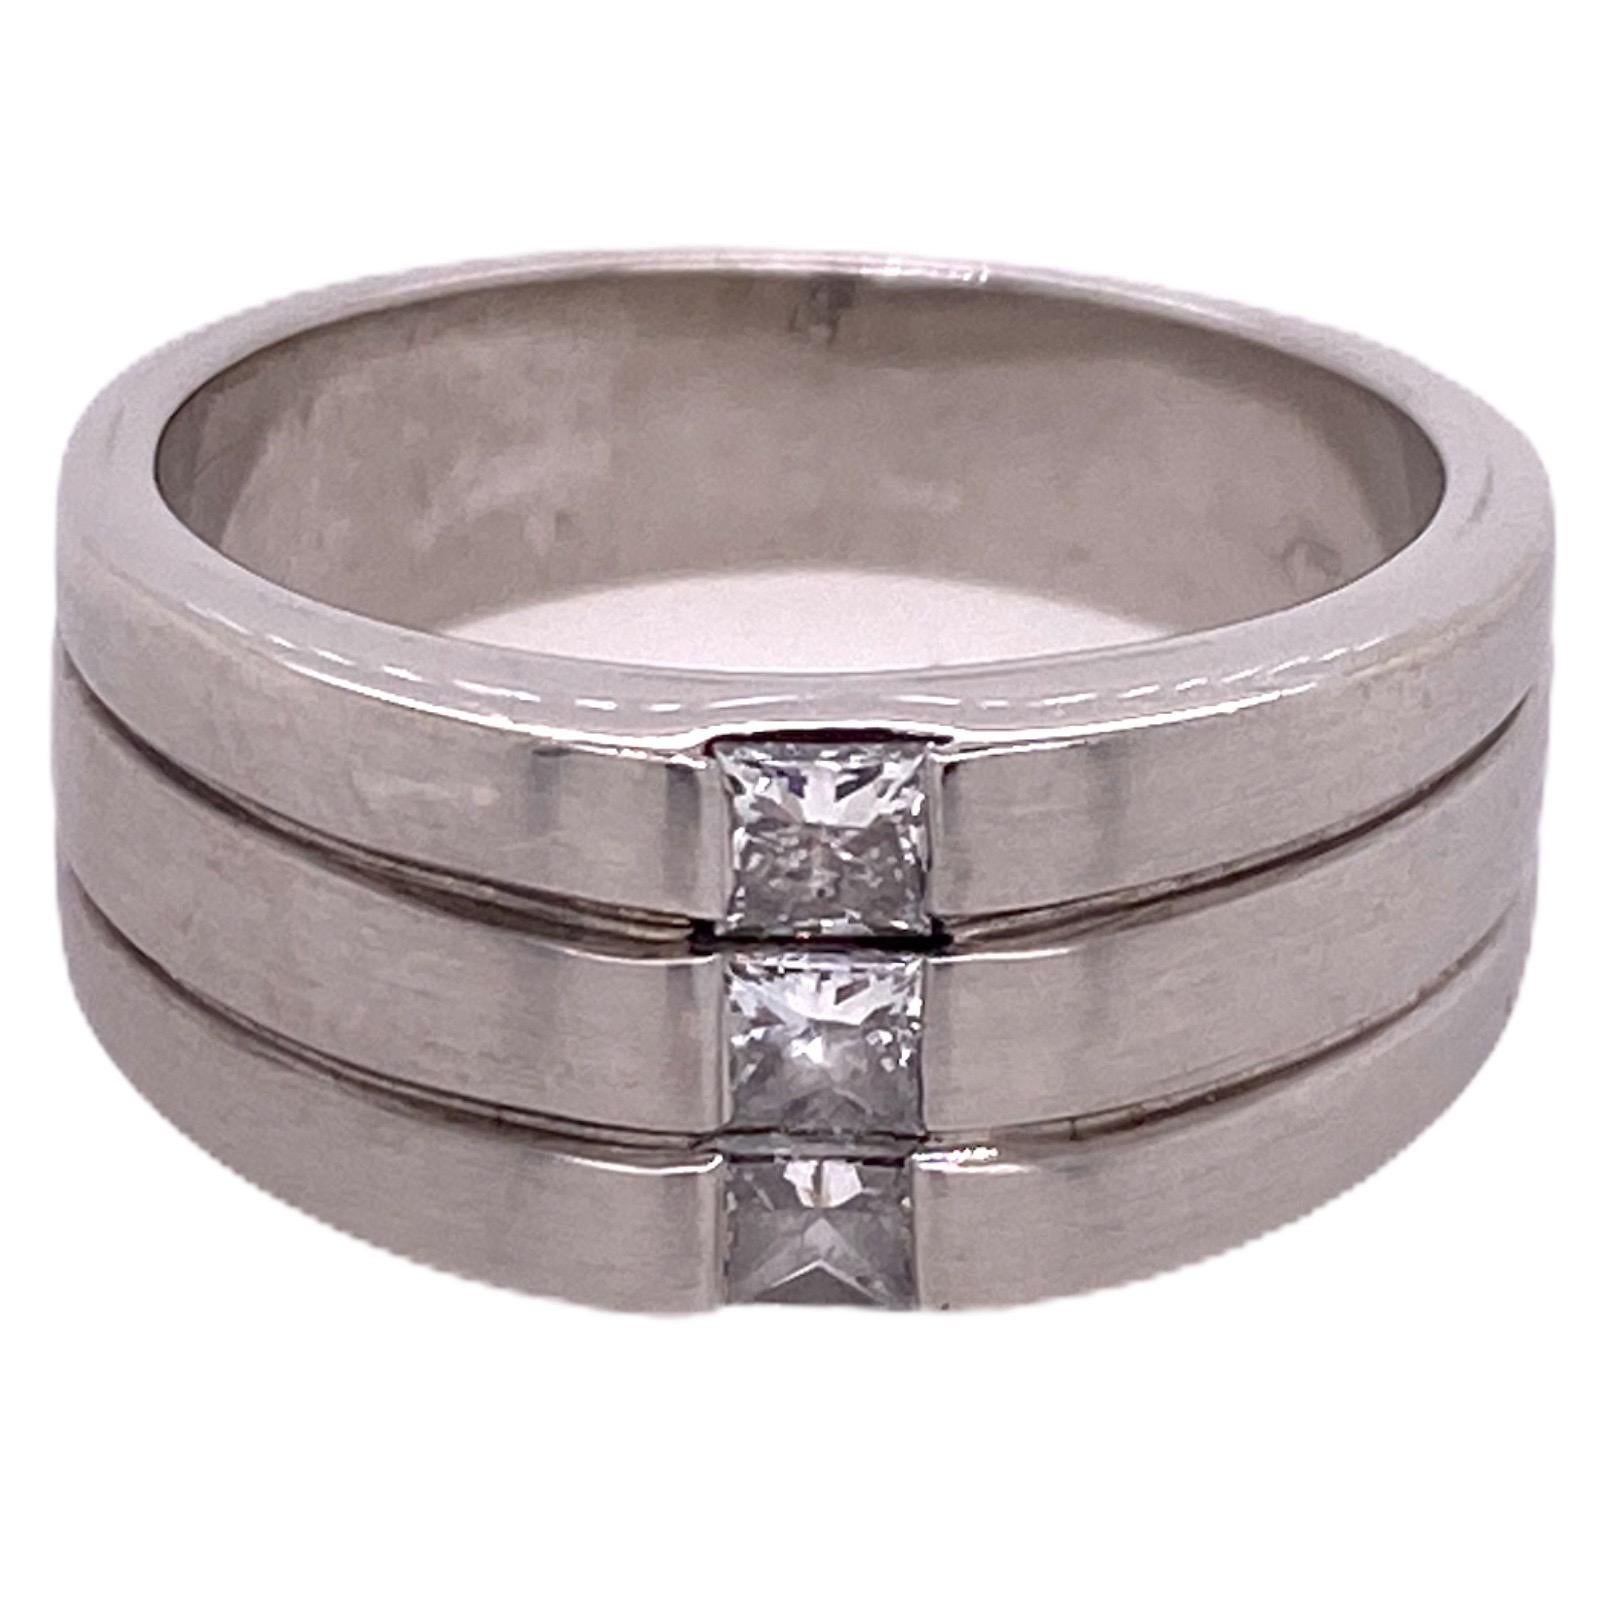 Men's diamond band ring fashioned in 14 karat white gold. The band features 3 princess cut diamonds weighing .45 carat total weight and graded I color and SI clarity.  The band measures 10mm in width and is currently size 11 (can be sized). 